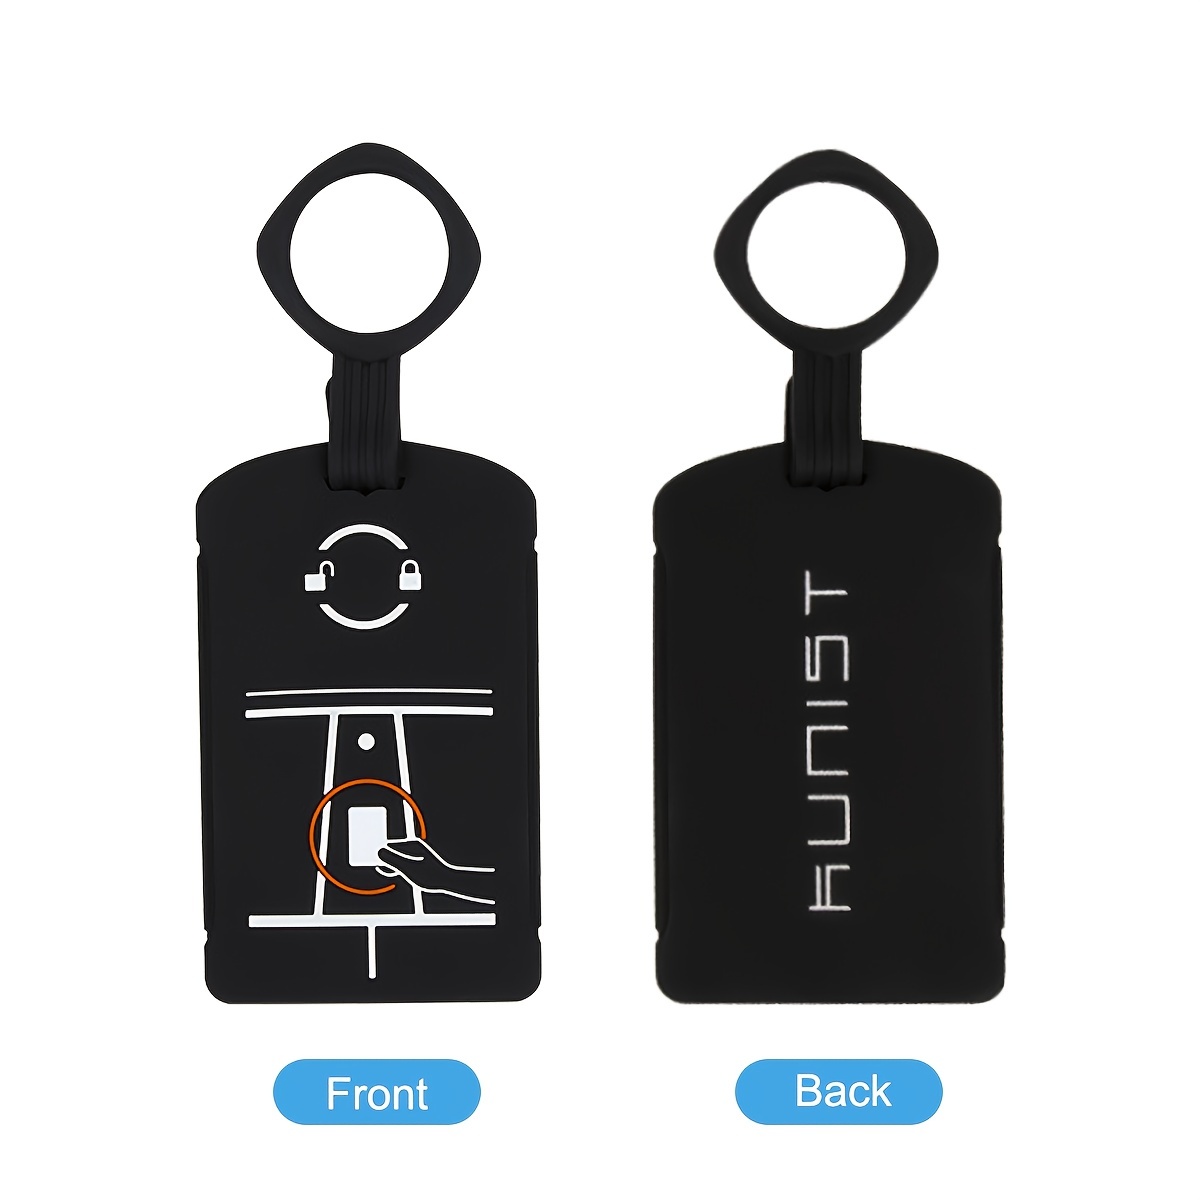 Petmoko Tesla Key Card Holder for Model 3 and Model Y Silicone Protector Key  Chain LOGO Pattern Car Accessorie 